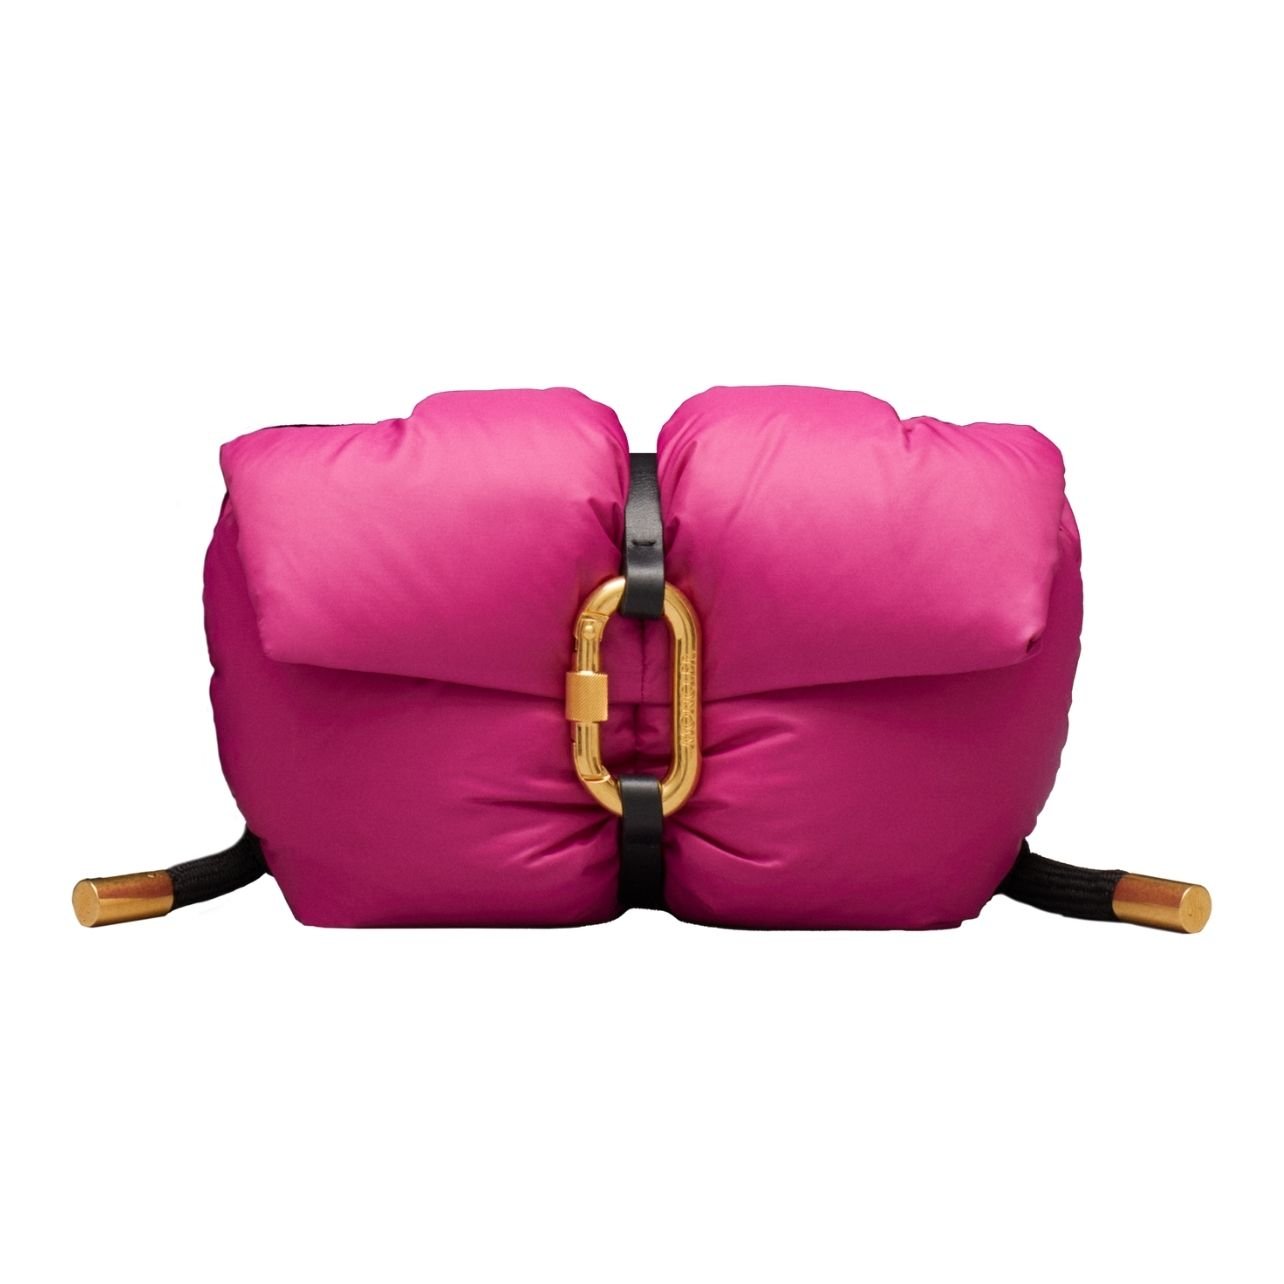 Pink Moncler purse with gold hardware